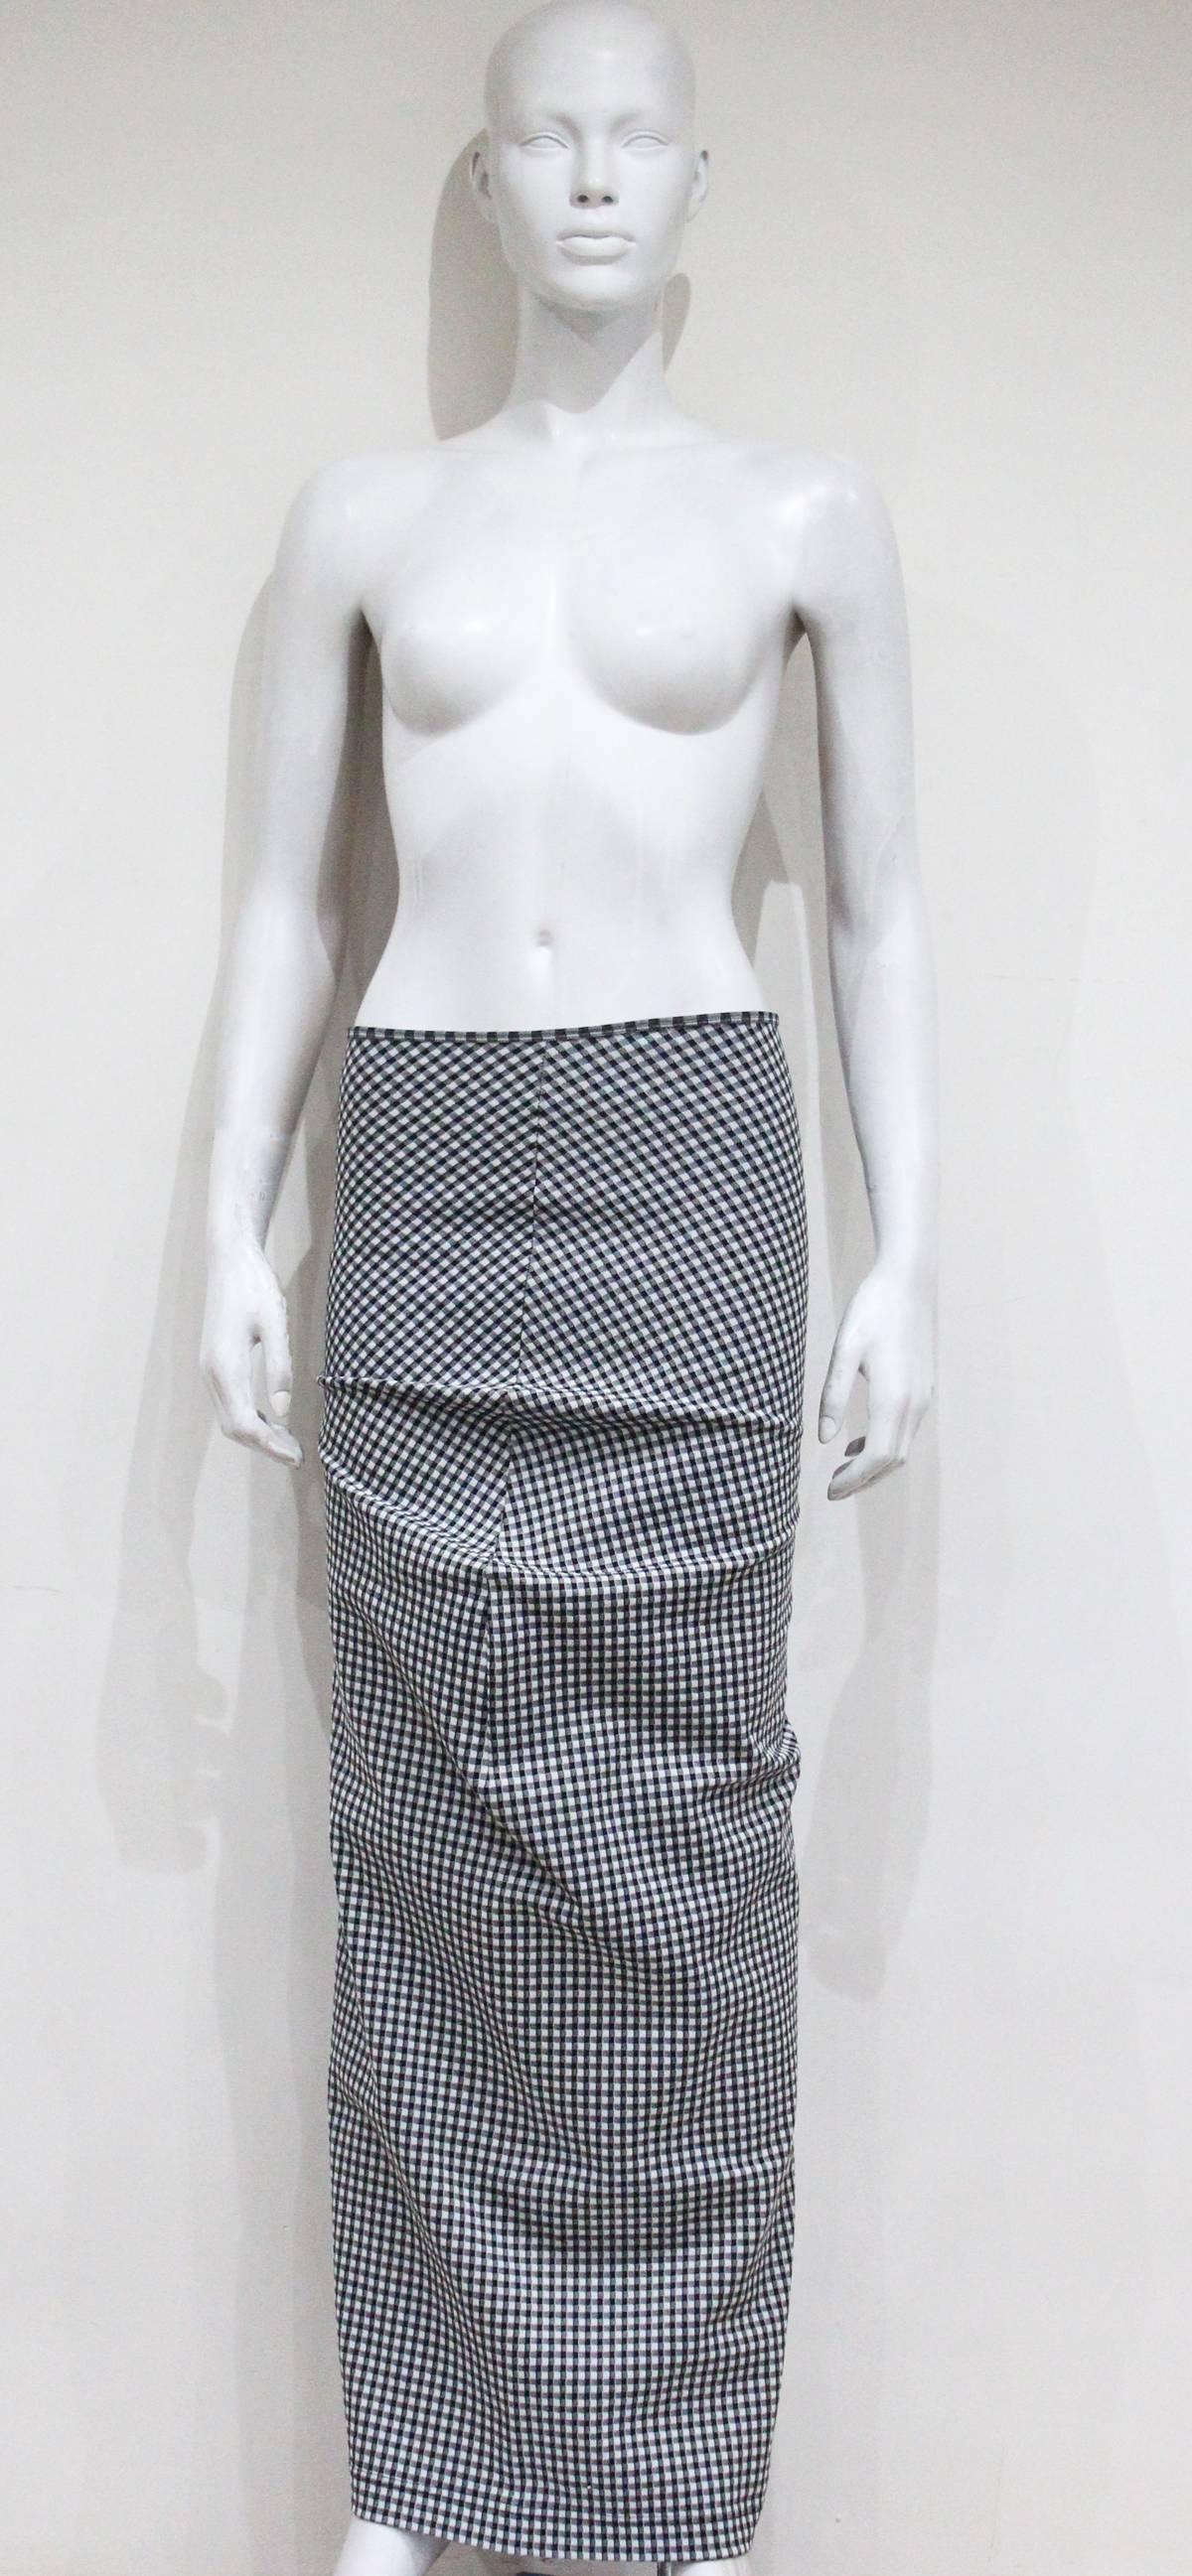 An exceptional and rare COMME des GARCONS / Rei Kawakubo skirt from the 'Body meets dress, dress meets body' / 'Lumps and bumps' spring/summer 1997 collection. The skirt of stretch nylon features a black and white checked gingham print and has